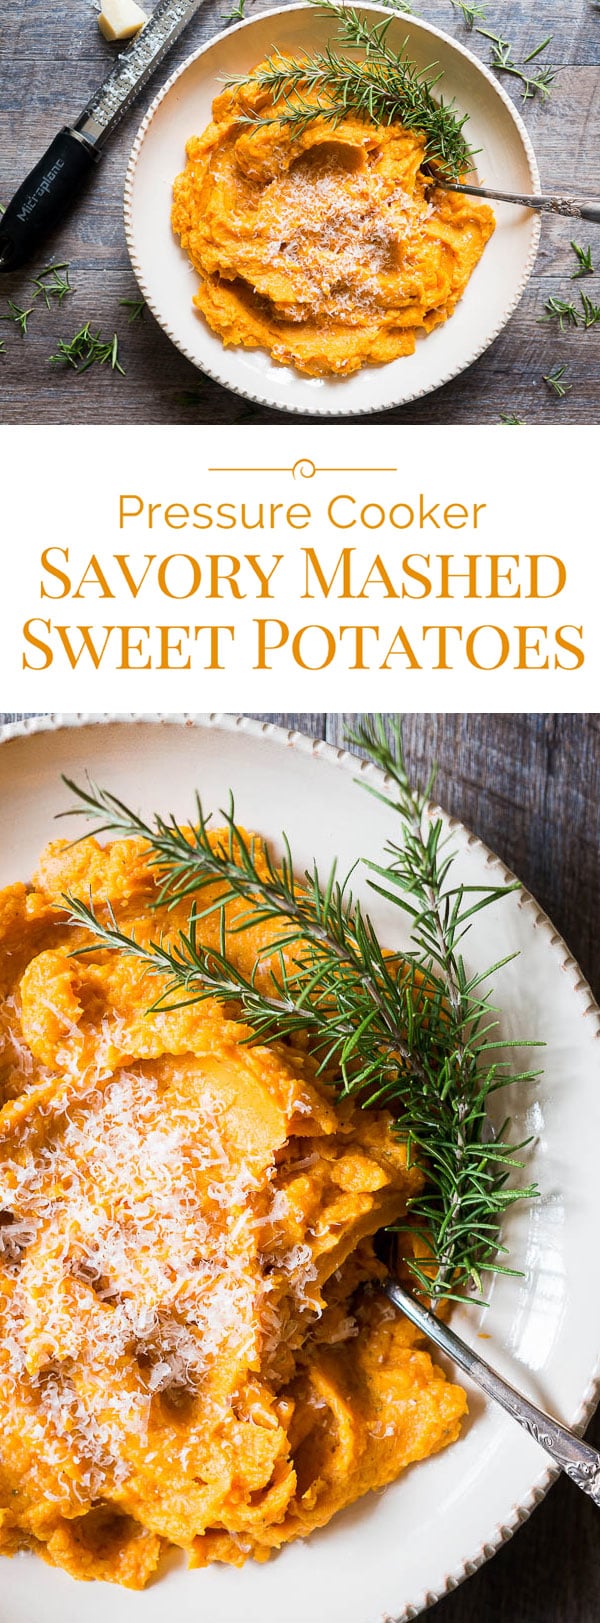 Pressure Cooker Savory Mashed Sweet Potatoes photo collage